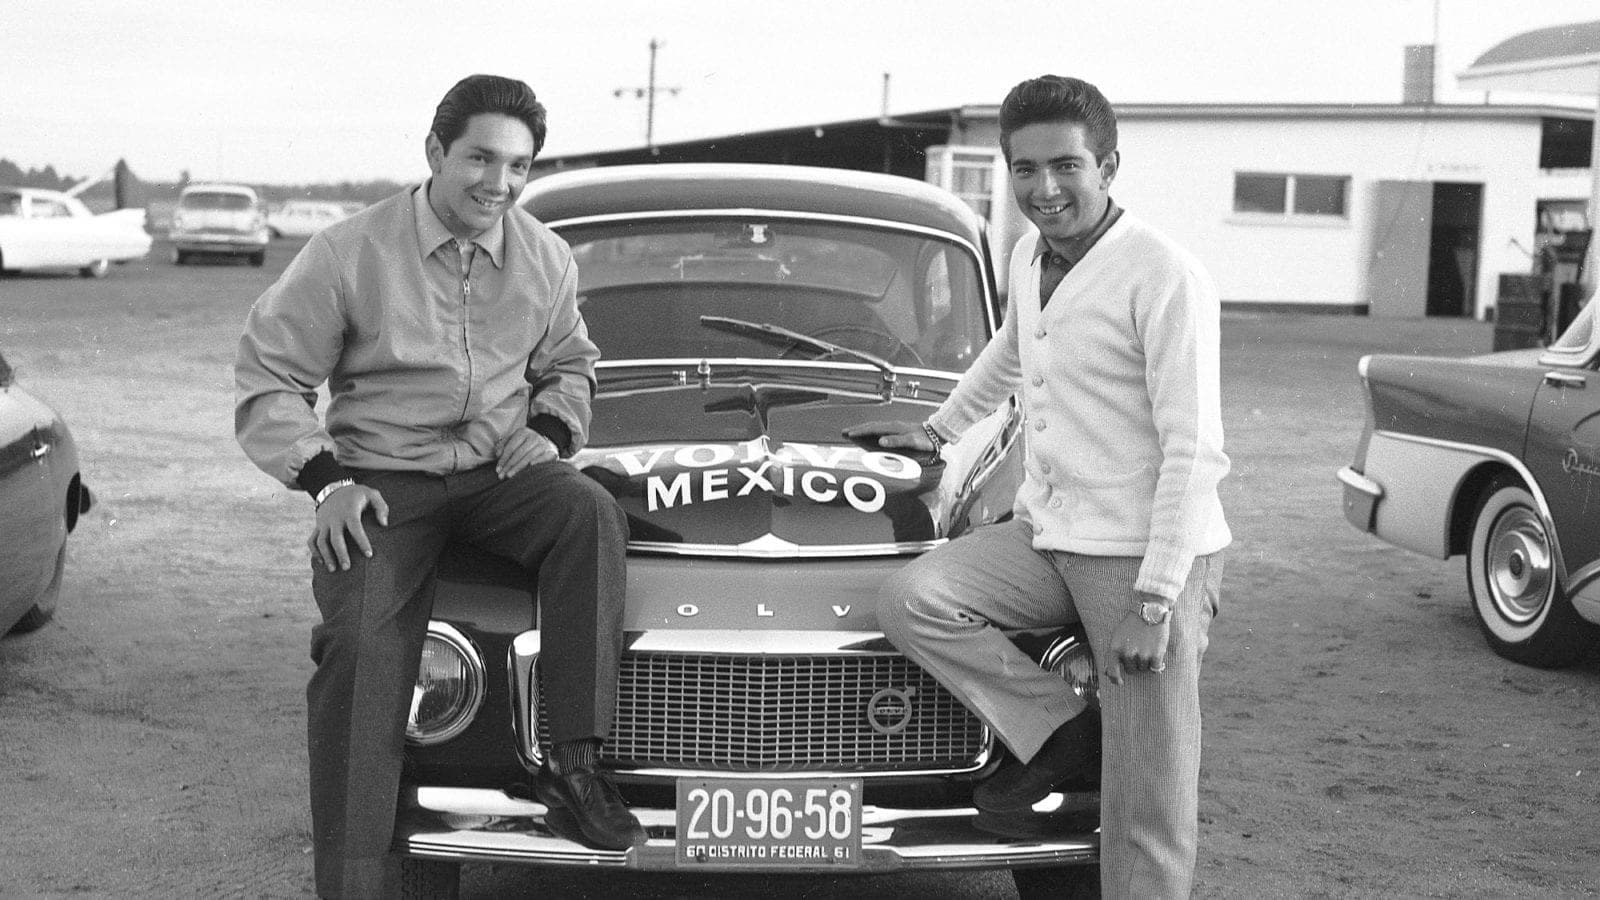 DAYTONA BEACH, FL - JANUARY 25, 1960: Brothers Pedro (L) and Ricardo Rodriguez (R) with the Volvo of Mexico entry for the twin Compact Car races that were held at Daytona International Speedway on January 31, 1960. Pedro actually drove the Volvo in the races, while Ricardo was behind the wheel of a Chevrolet Corvair. (Photo by ISC Images & Archives via Getty Images)